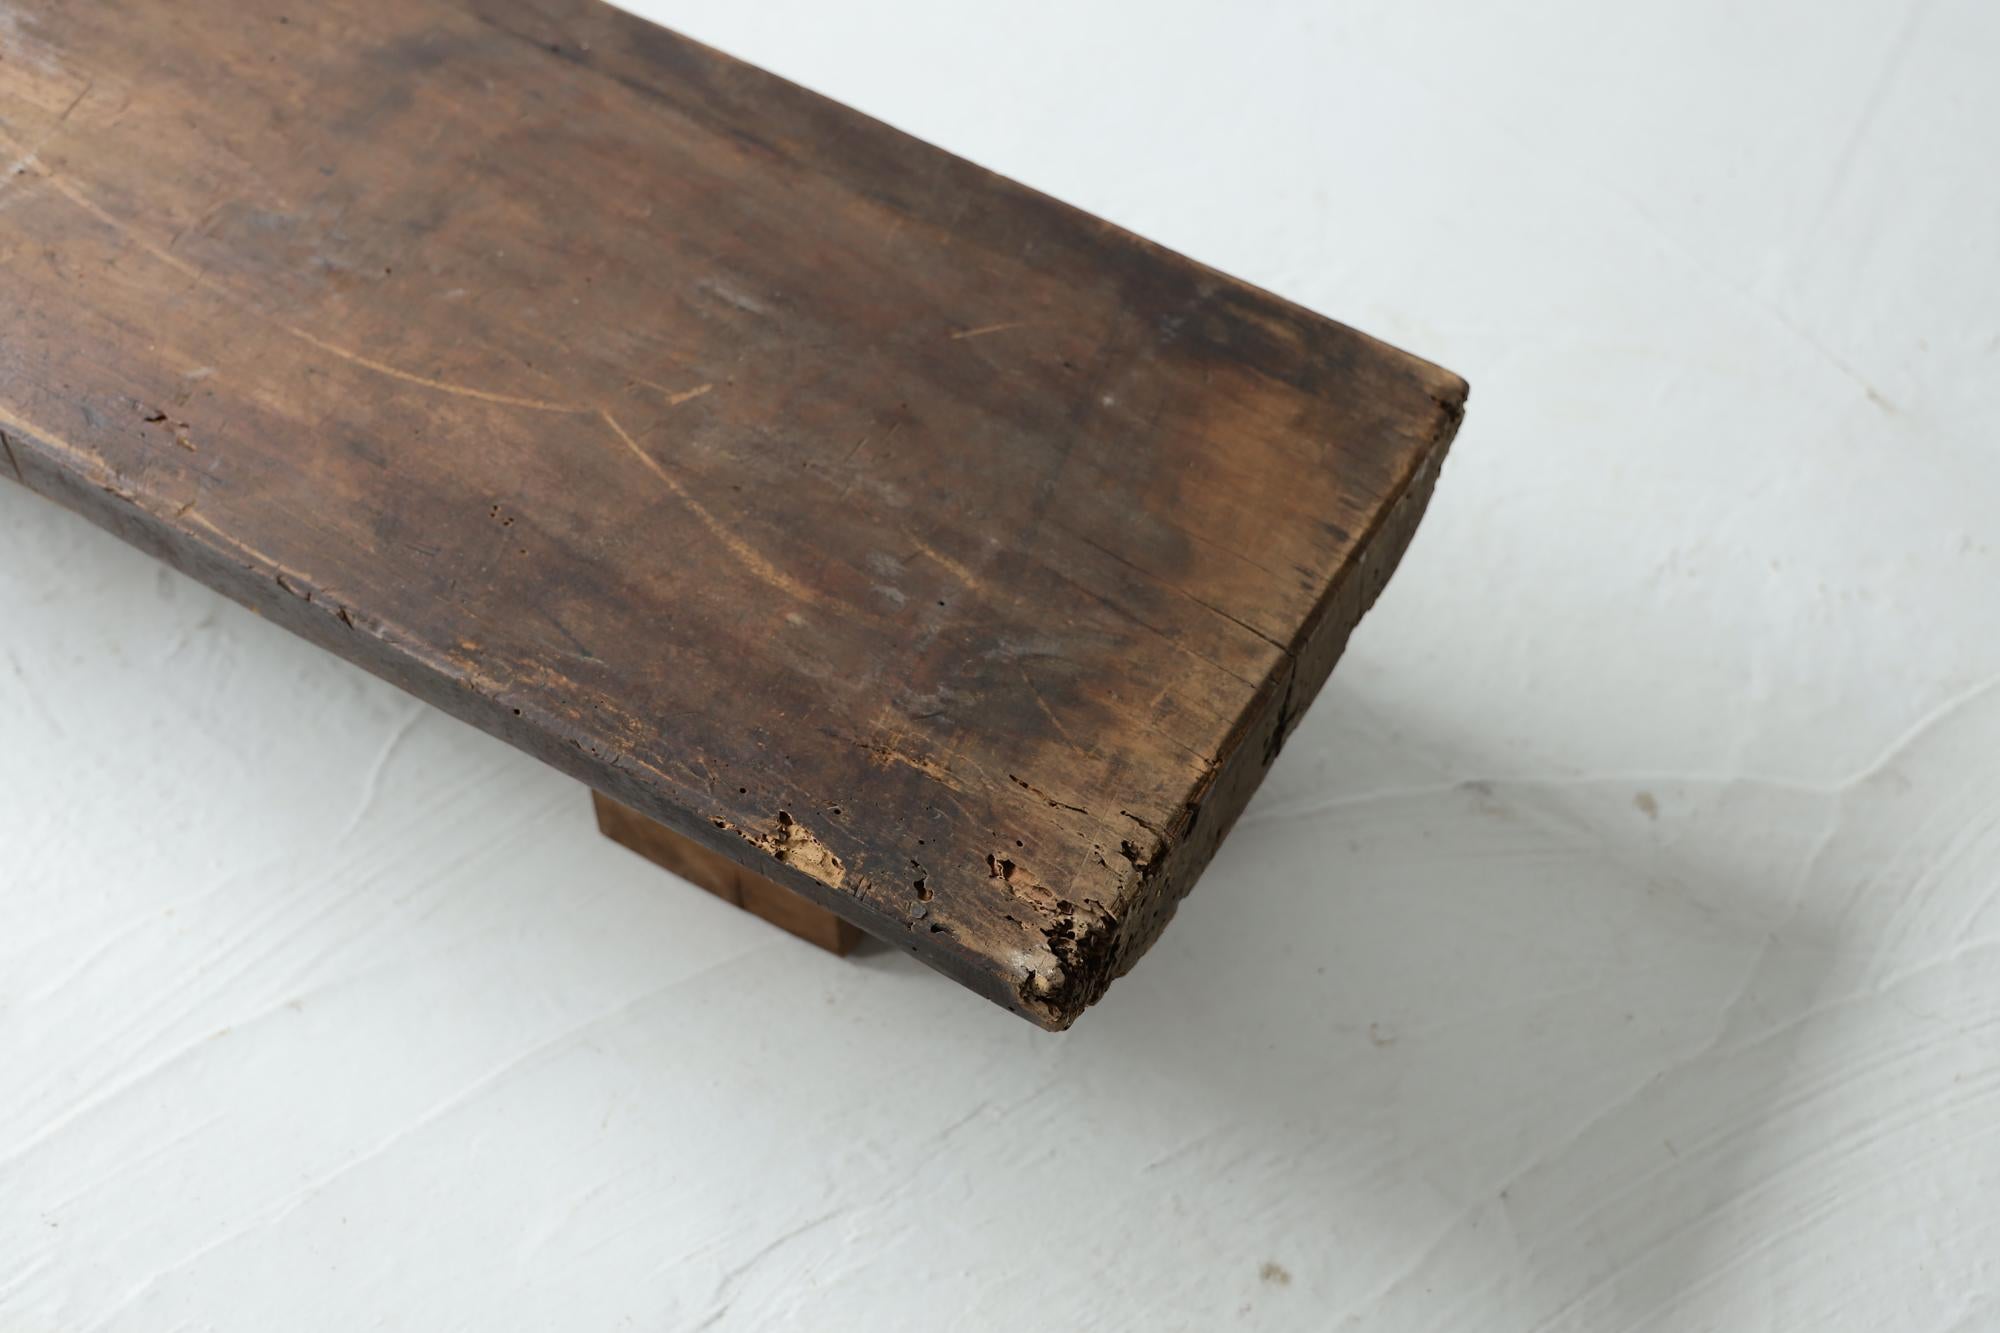 Wooden Low Table, Japanese Antique, Wabi-Sabi, Mingei In Good Condition For Sale In Katori-Shi, 12